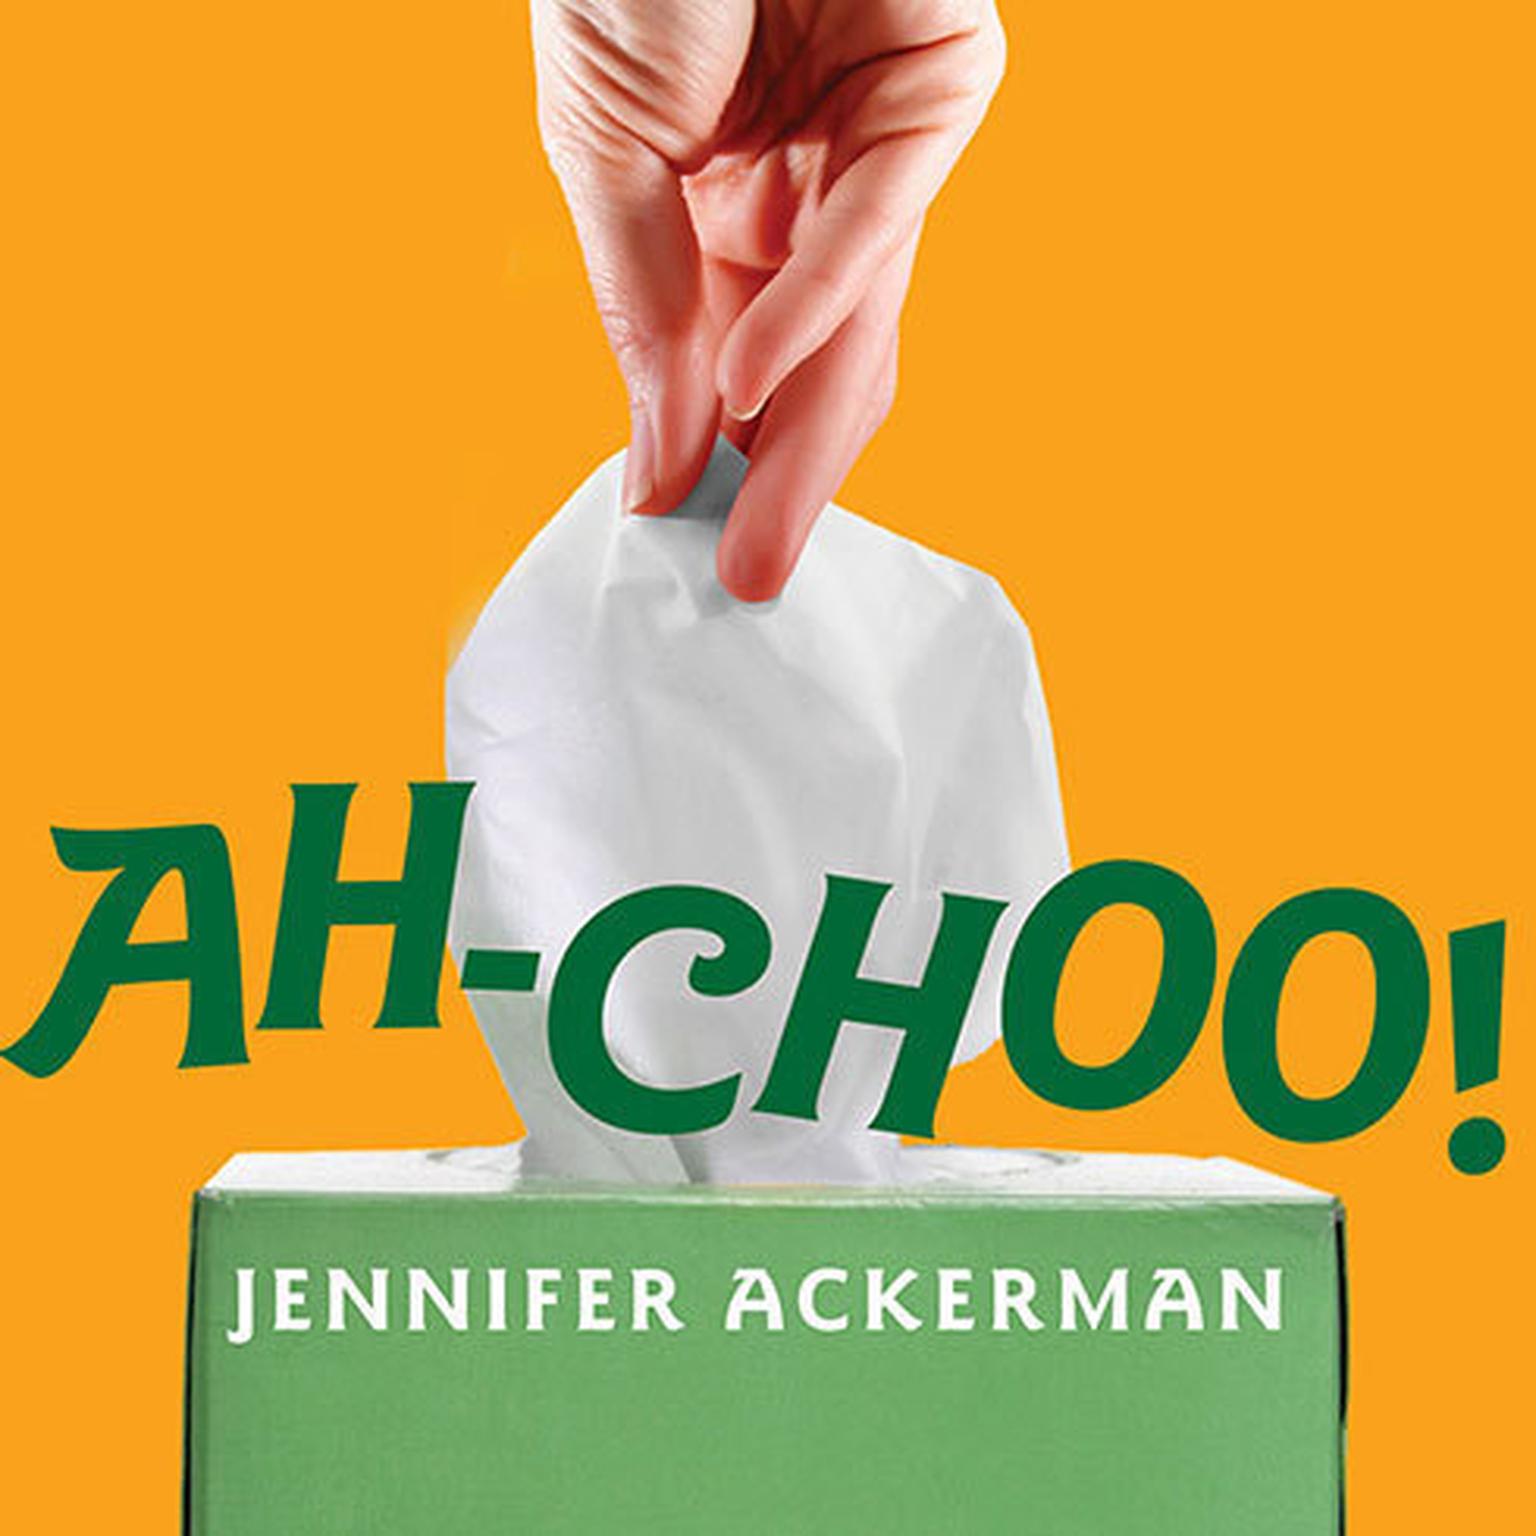 Ah-Choo!: The Uncommon Life of Your Common Cold Audiobook, by Jennifer Ackerman